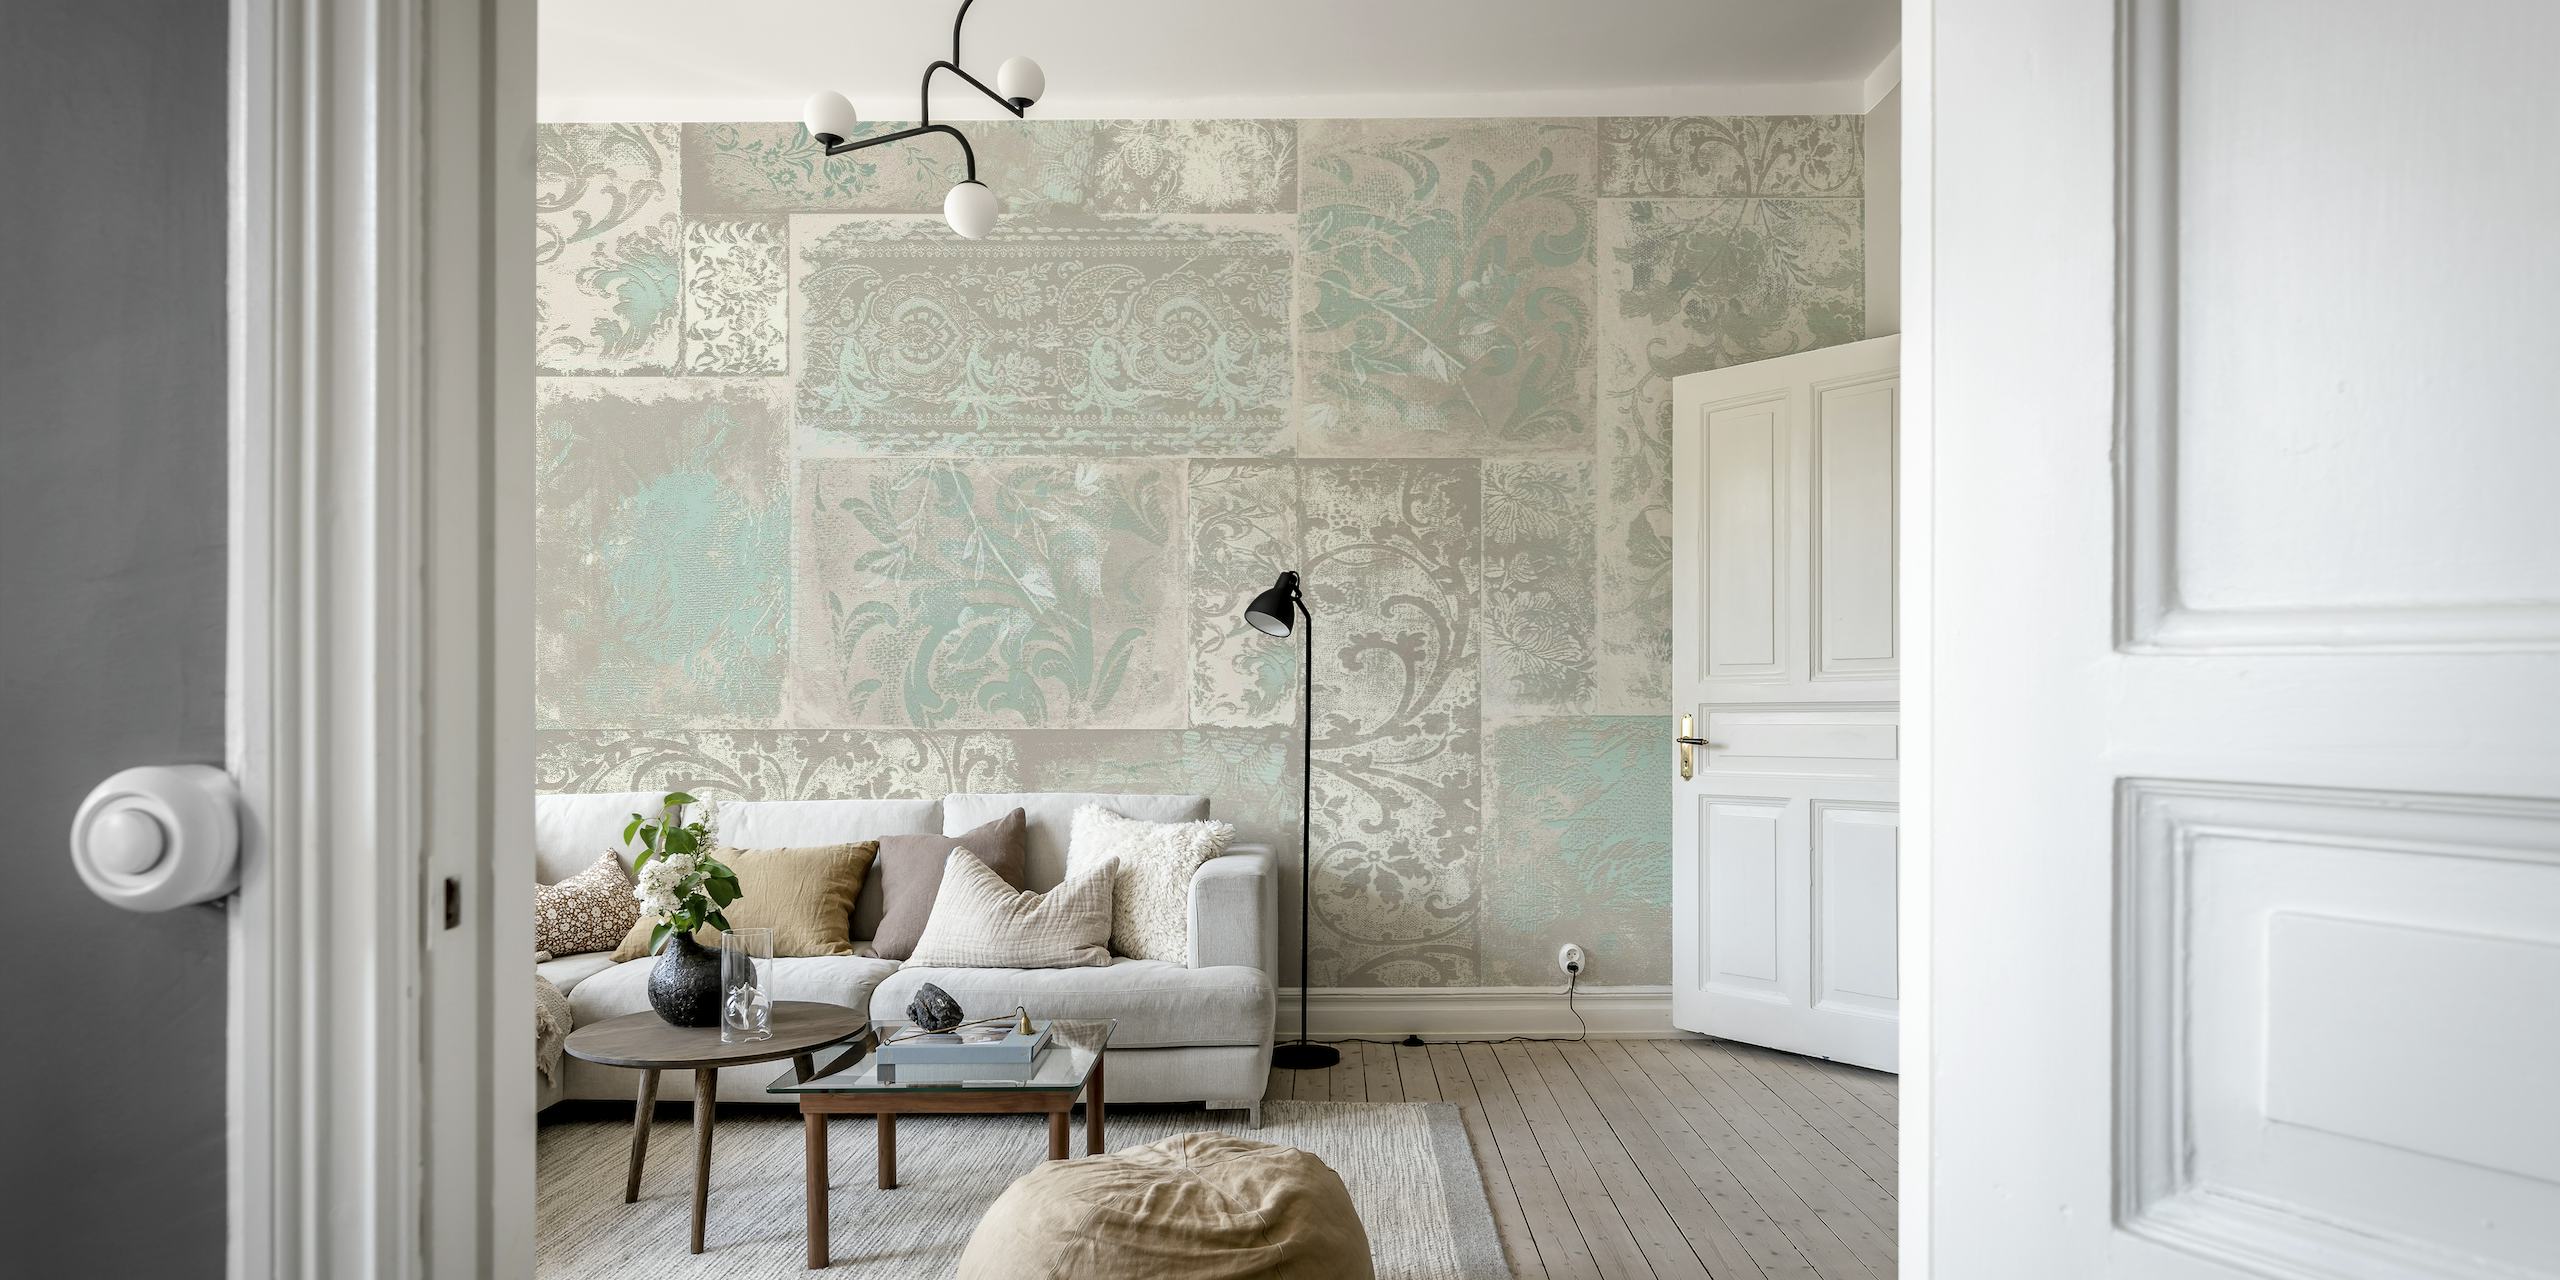 Bohemian Patchwork Beige Mint wall mural with a blend of vintage patterns and cool tones